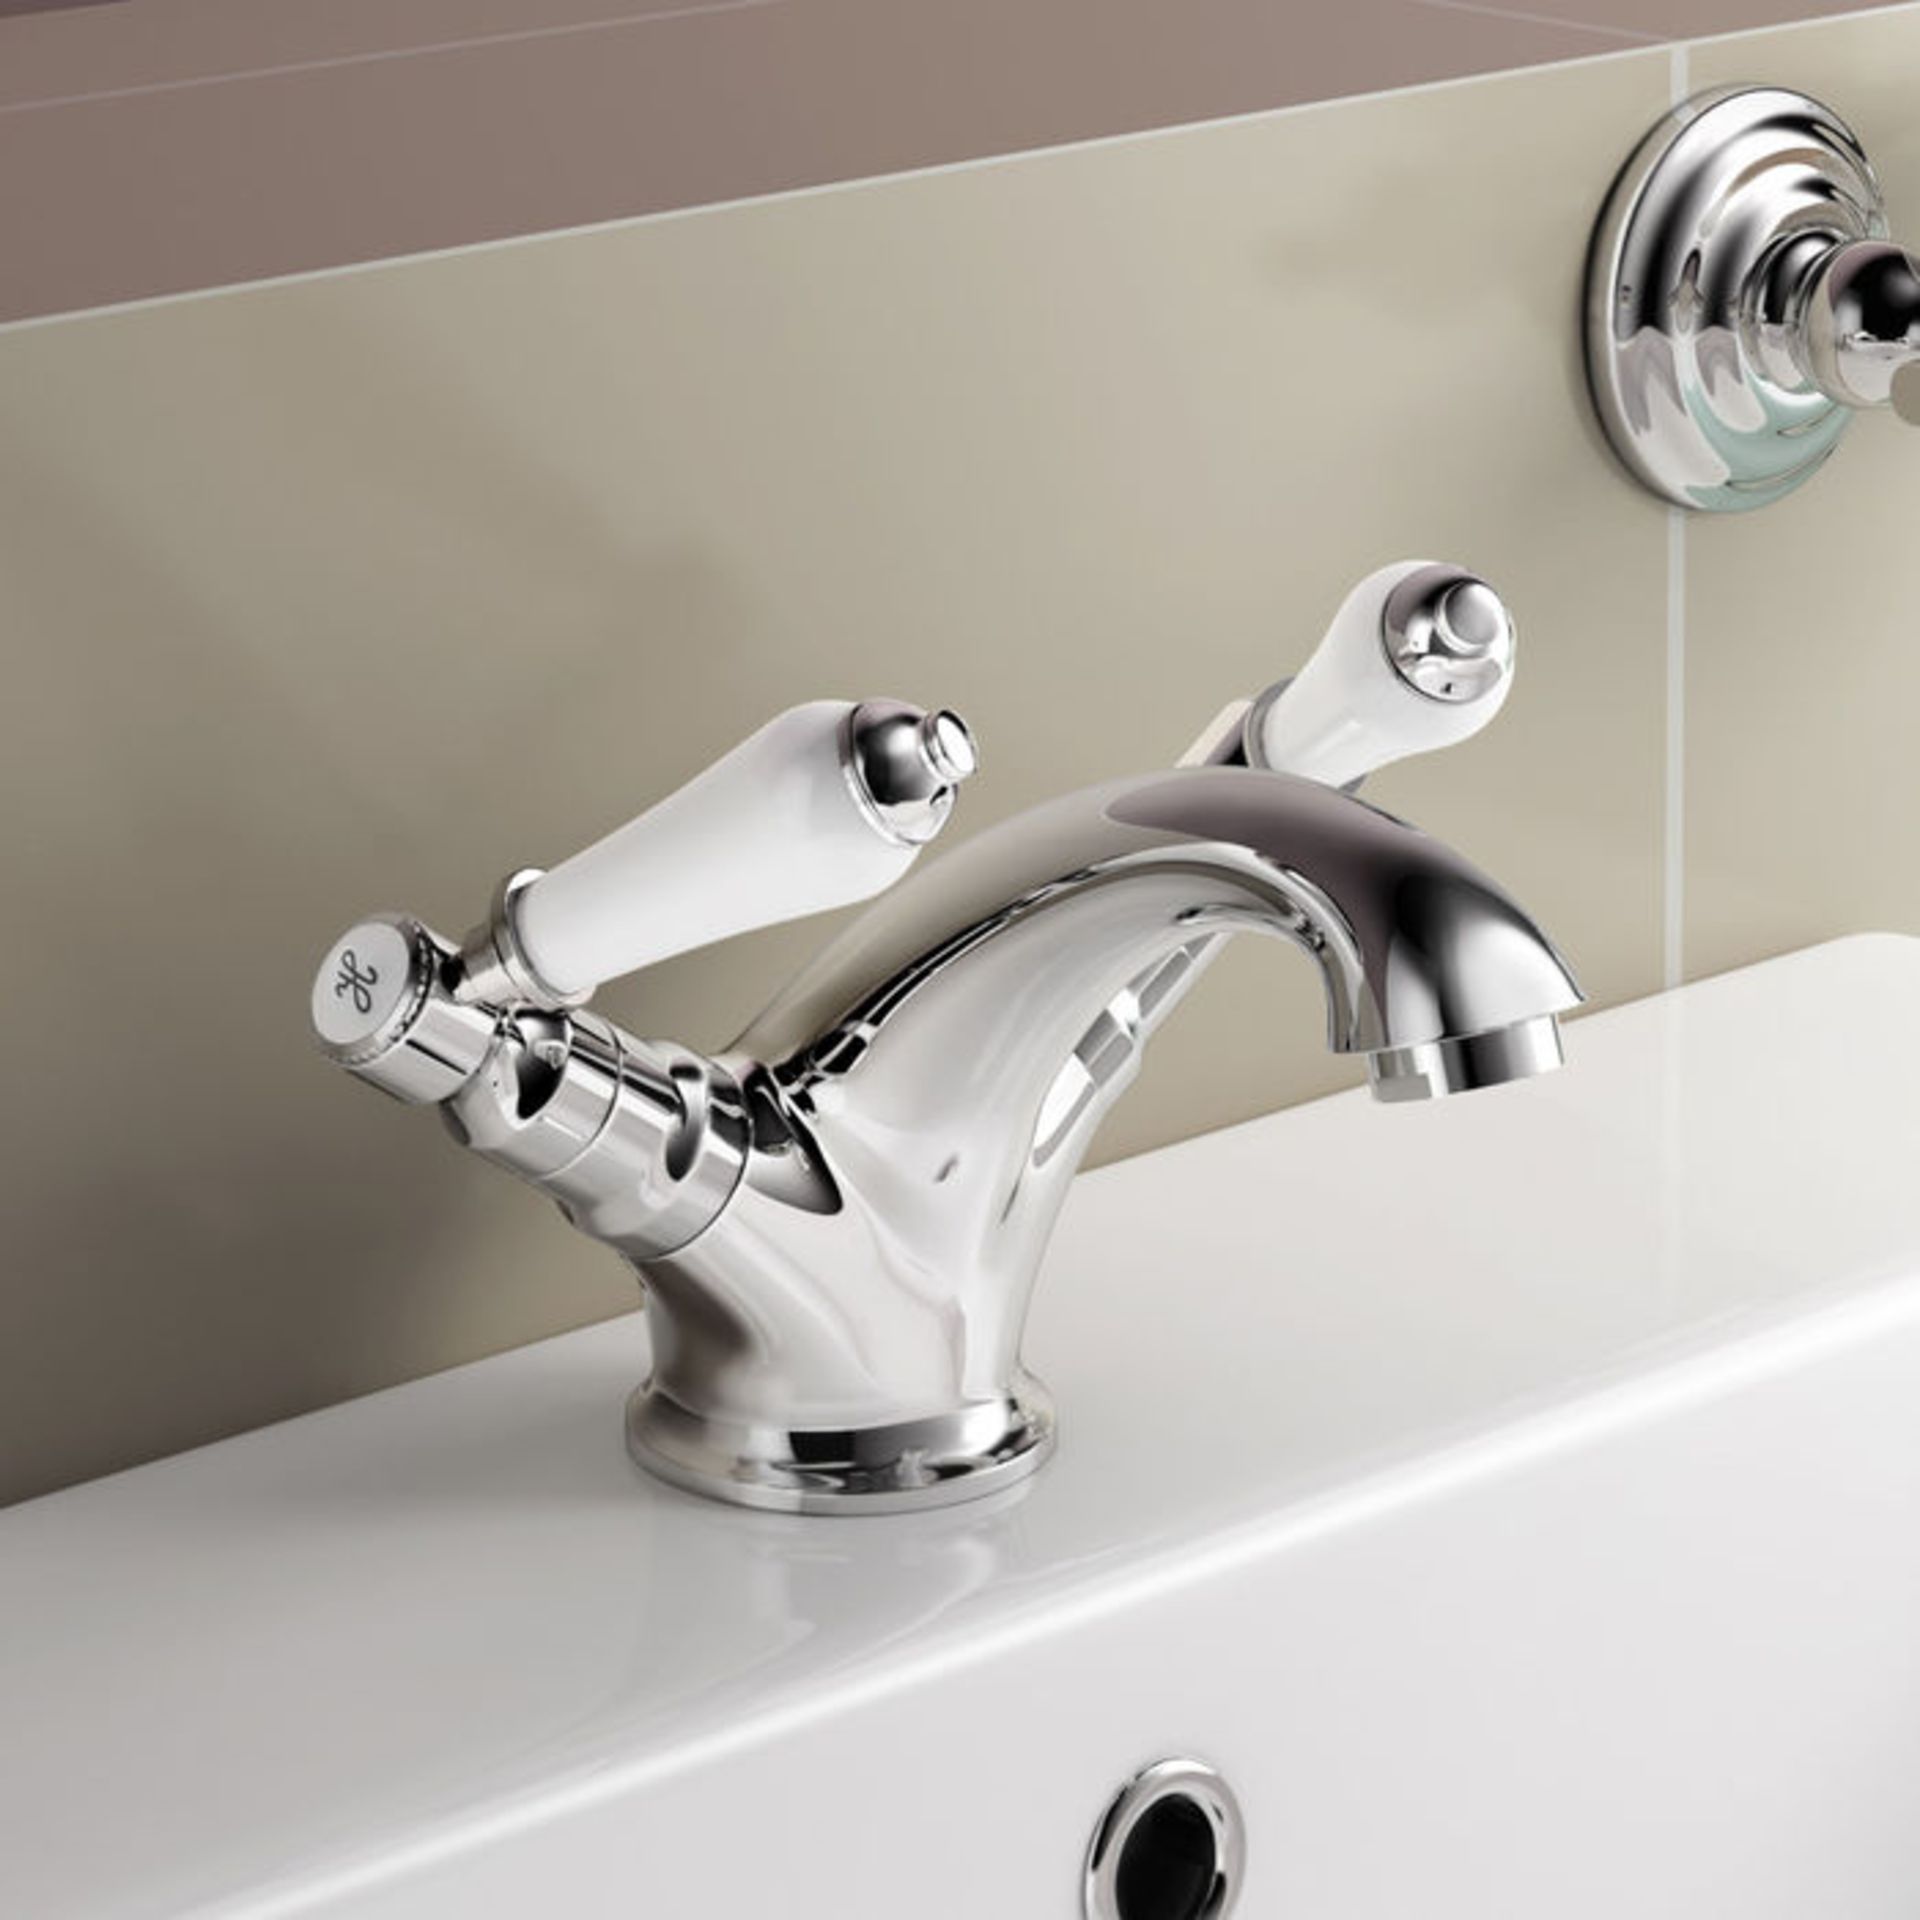 (AL31) Regal Chrome Traditional Basin Sink Lever Mixer Tap Chrome Plated Solid Brass Mixer cartridge - Image 2 of 4